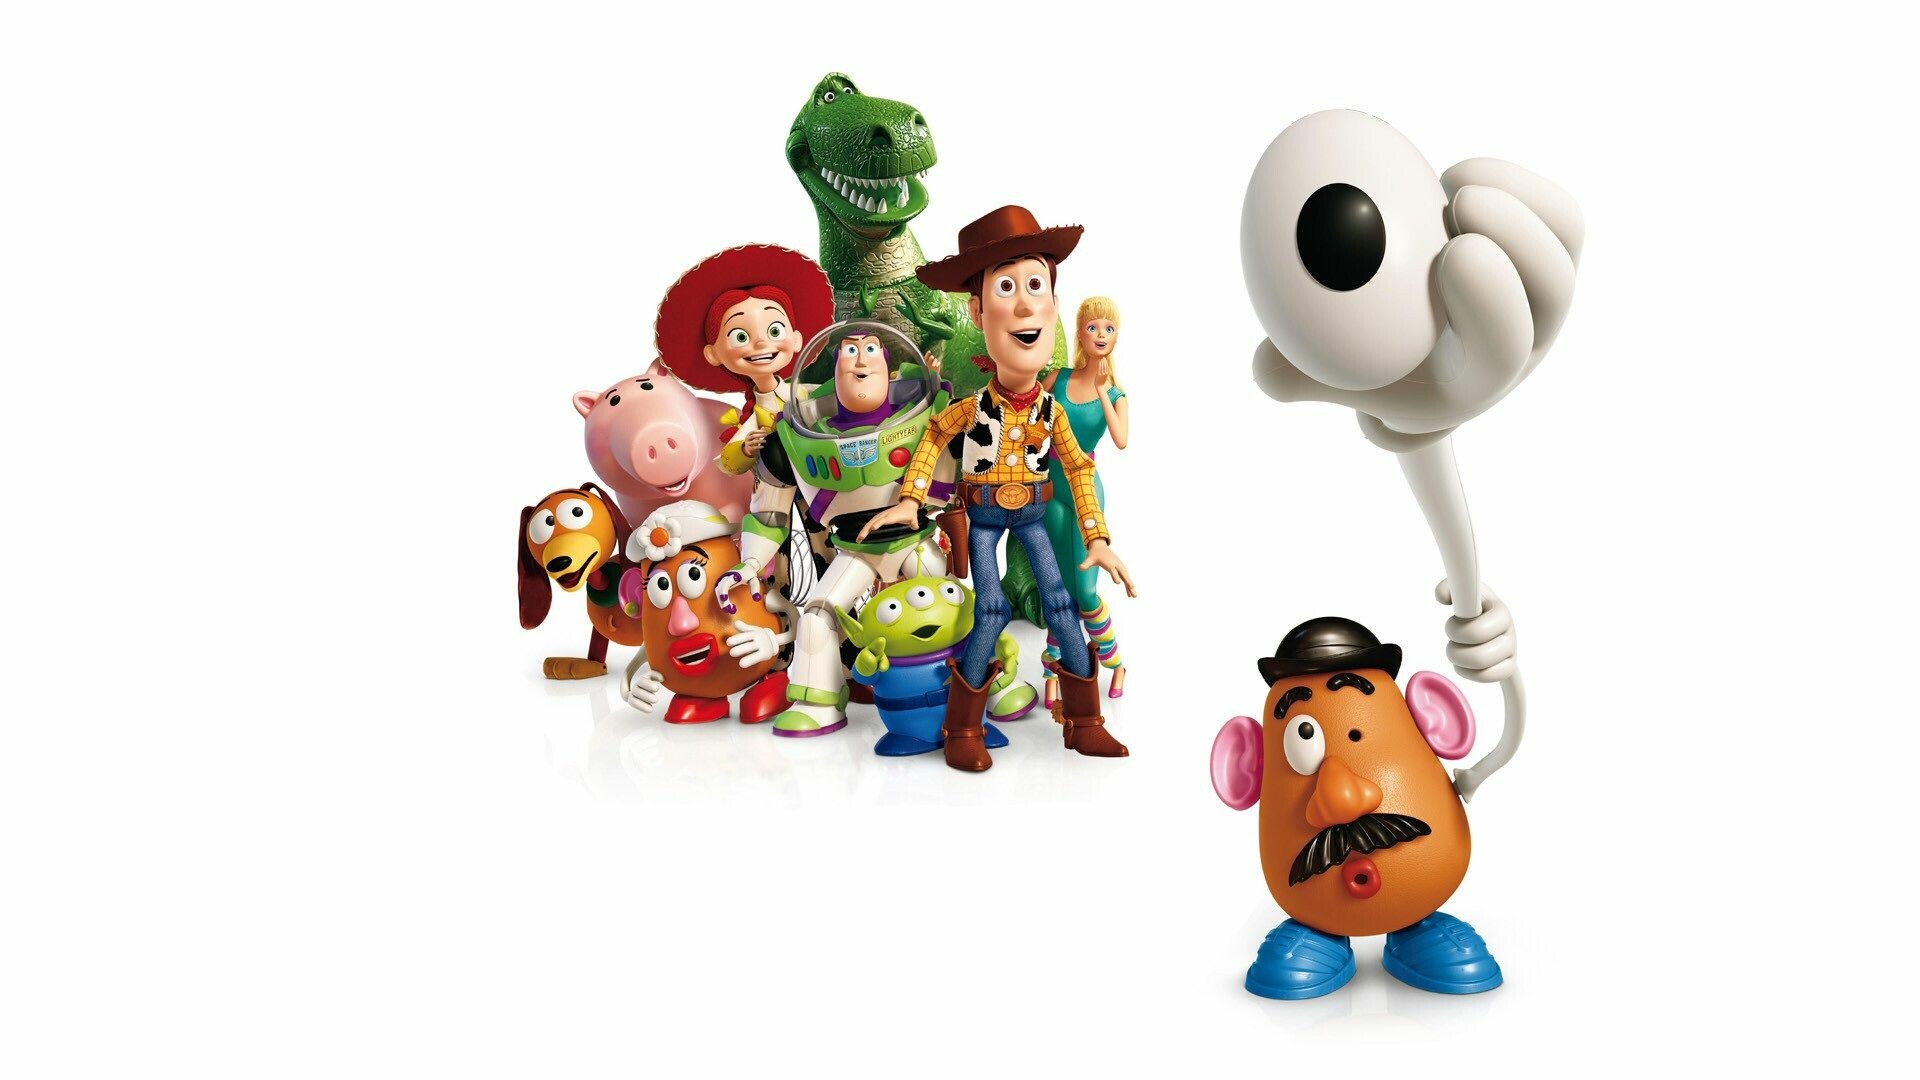 Toy Story: Woody, The film premiered at the Taormina Film Fest in Italy on June 12, 2010. 1920x1080 Full HD Wallpaper.